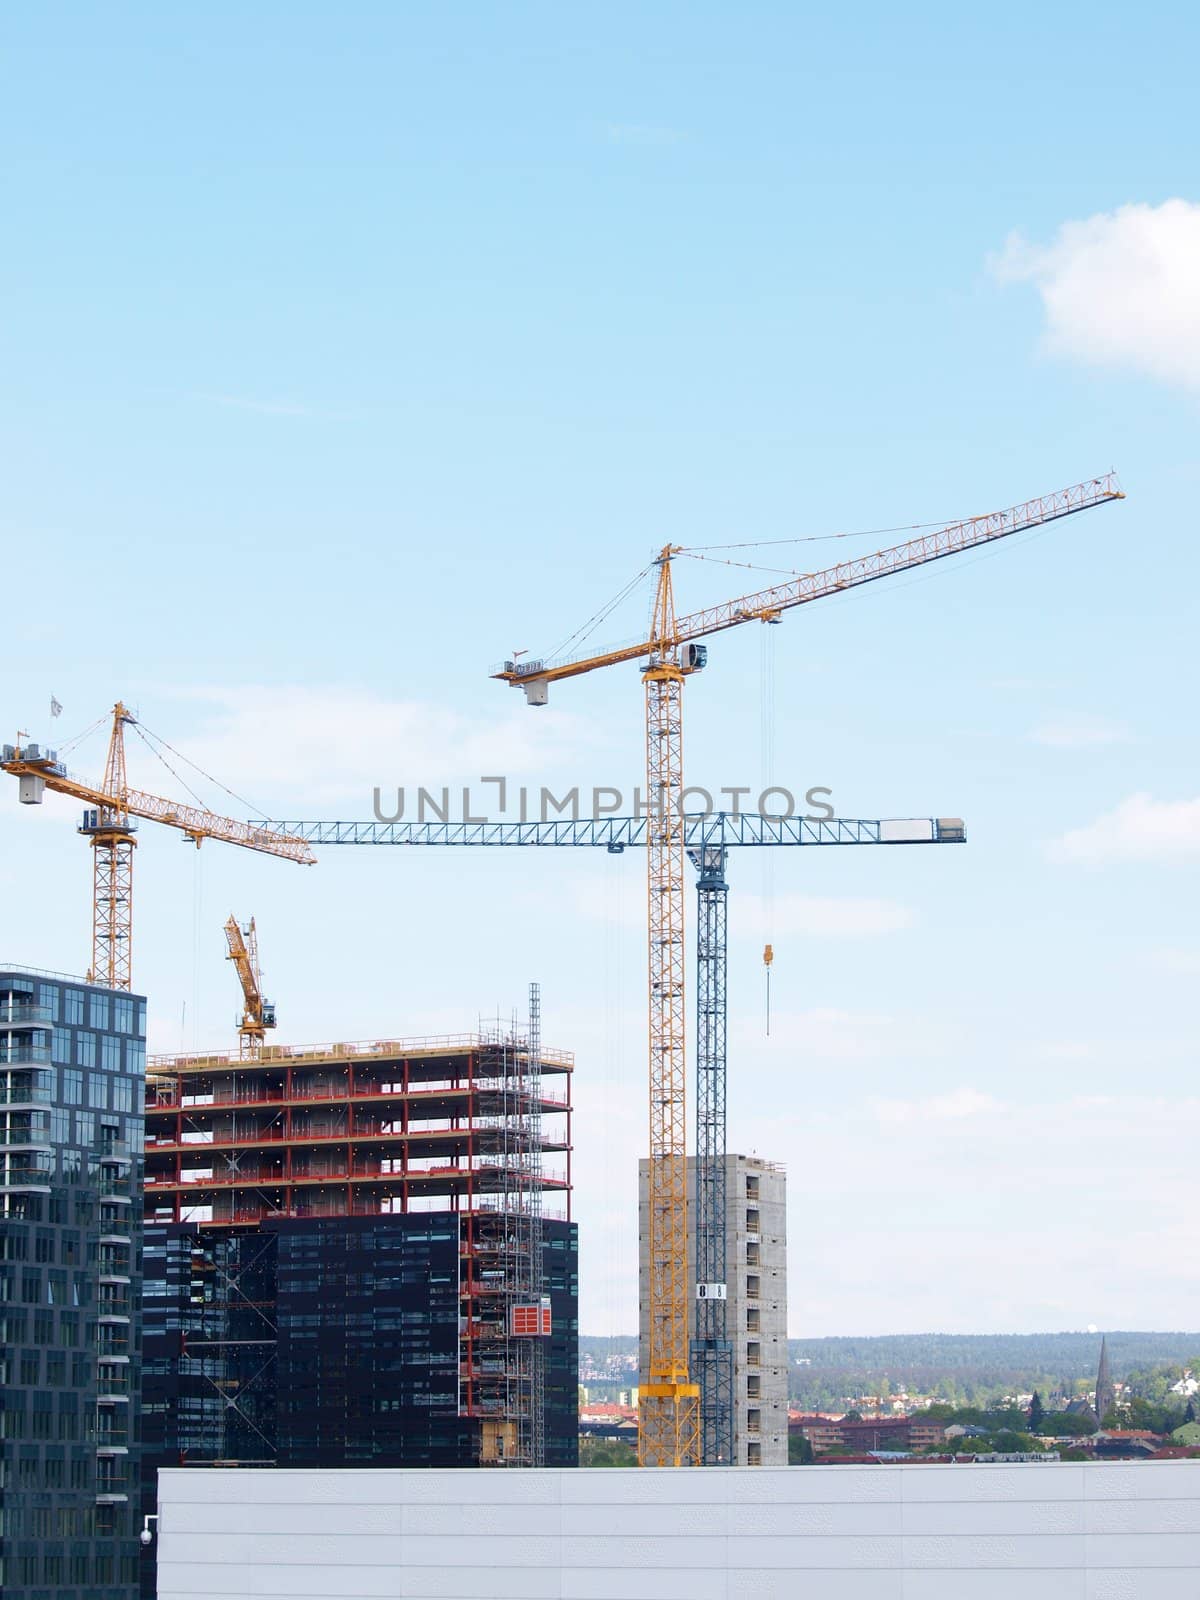 Construction site overview in a city, towards blue sky